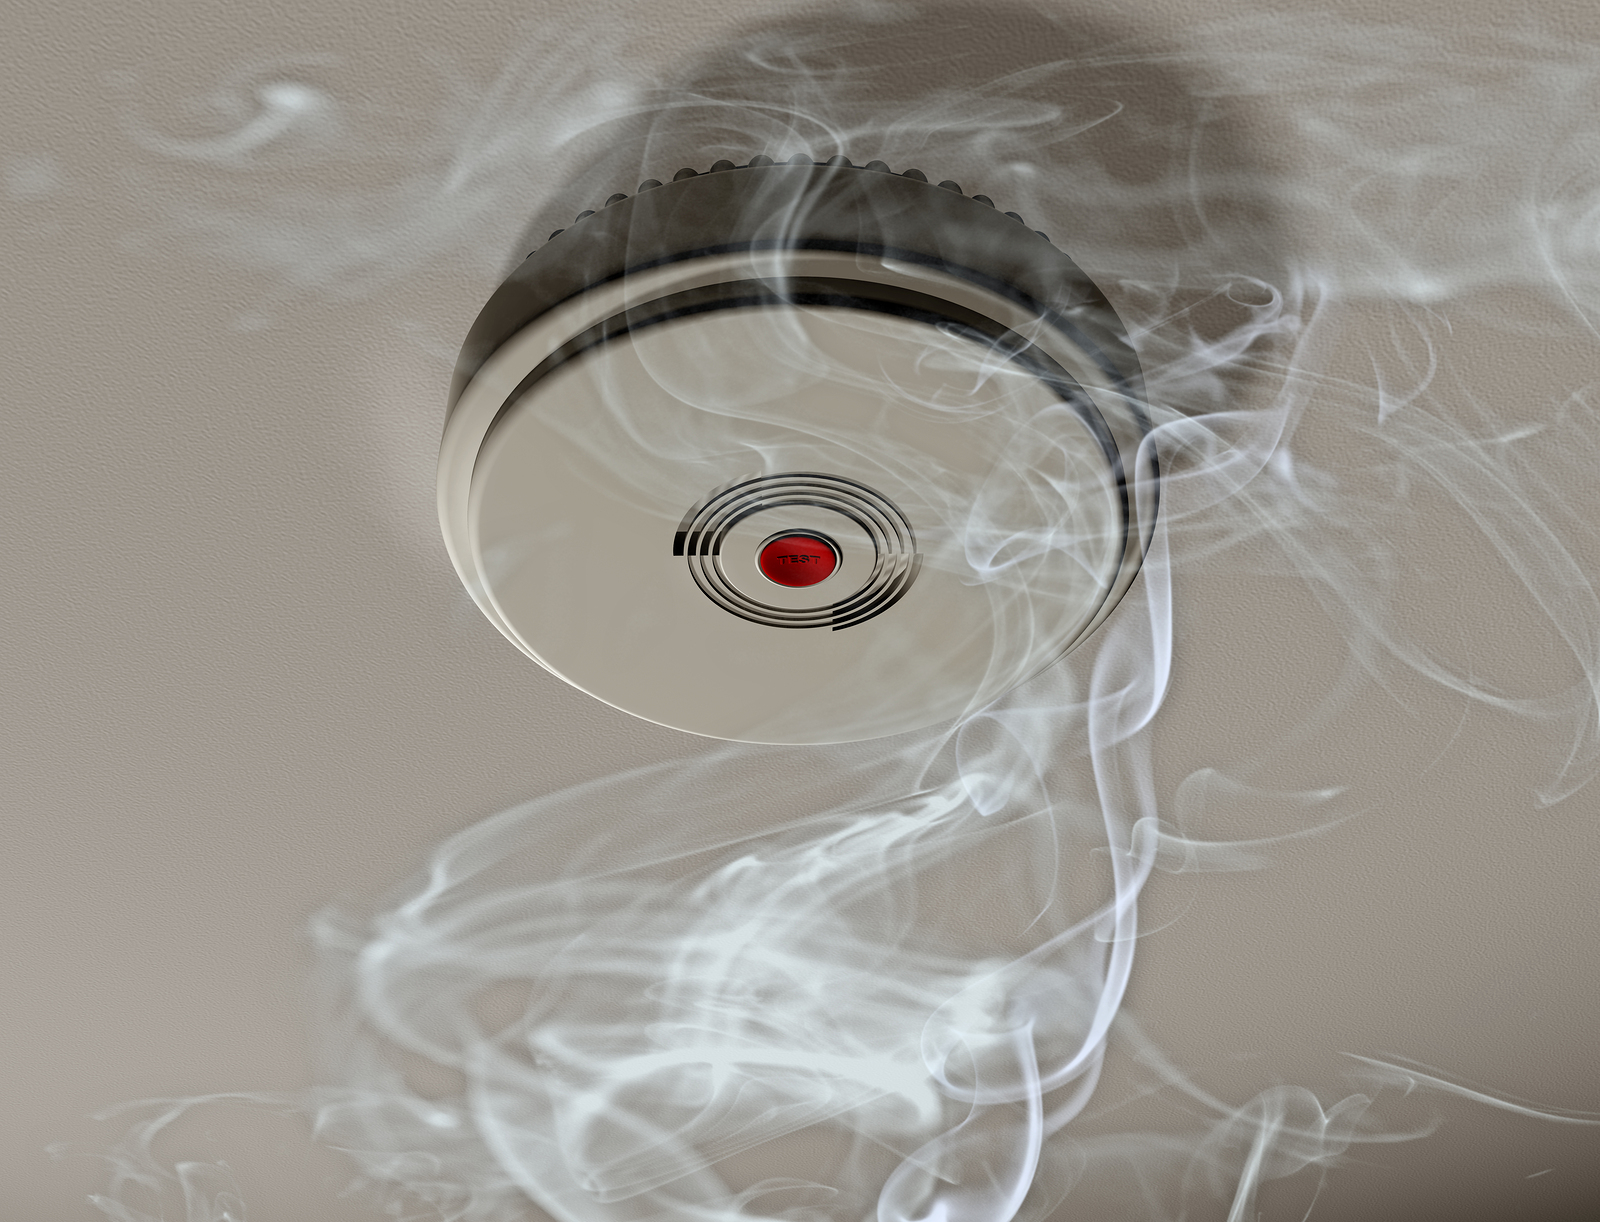 It's Time to Check the Smoke Alarms - Smoke Alarm on Ceiling_Wilcox Electric DC